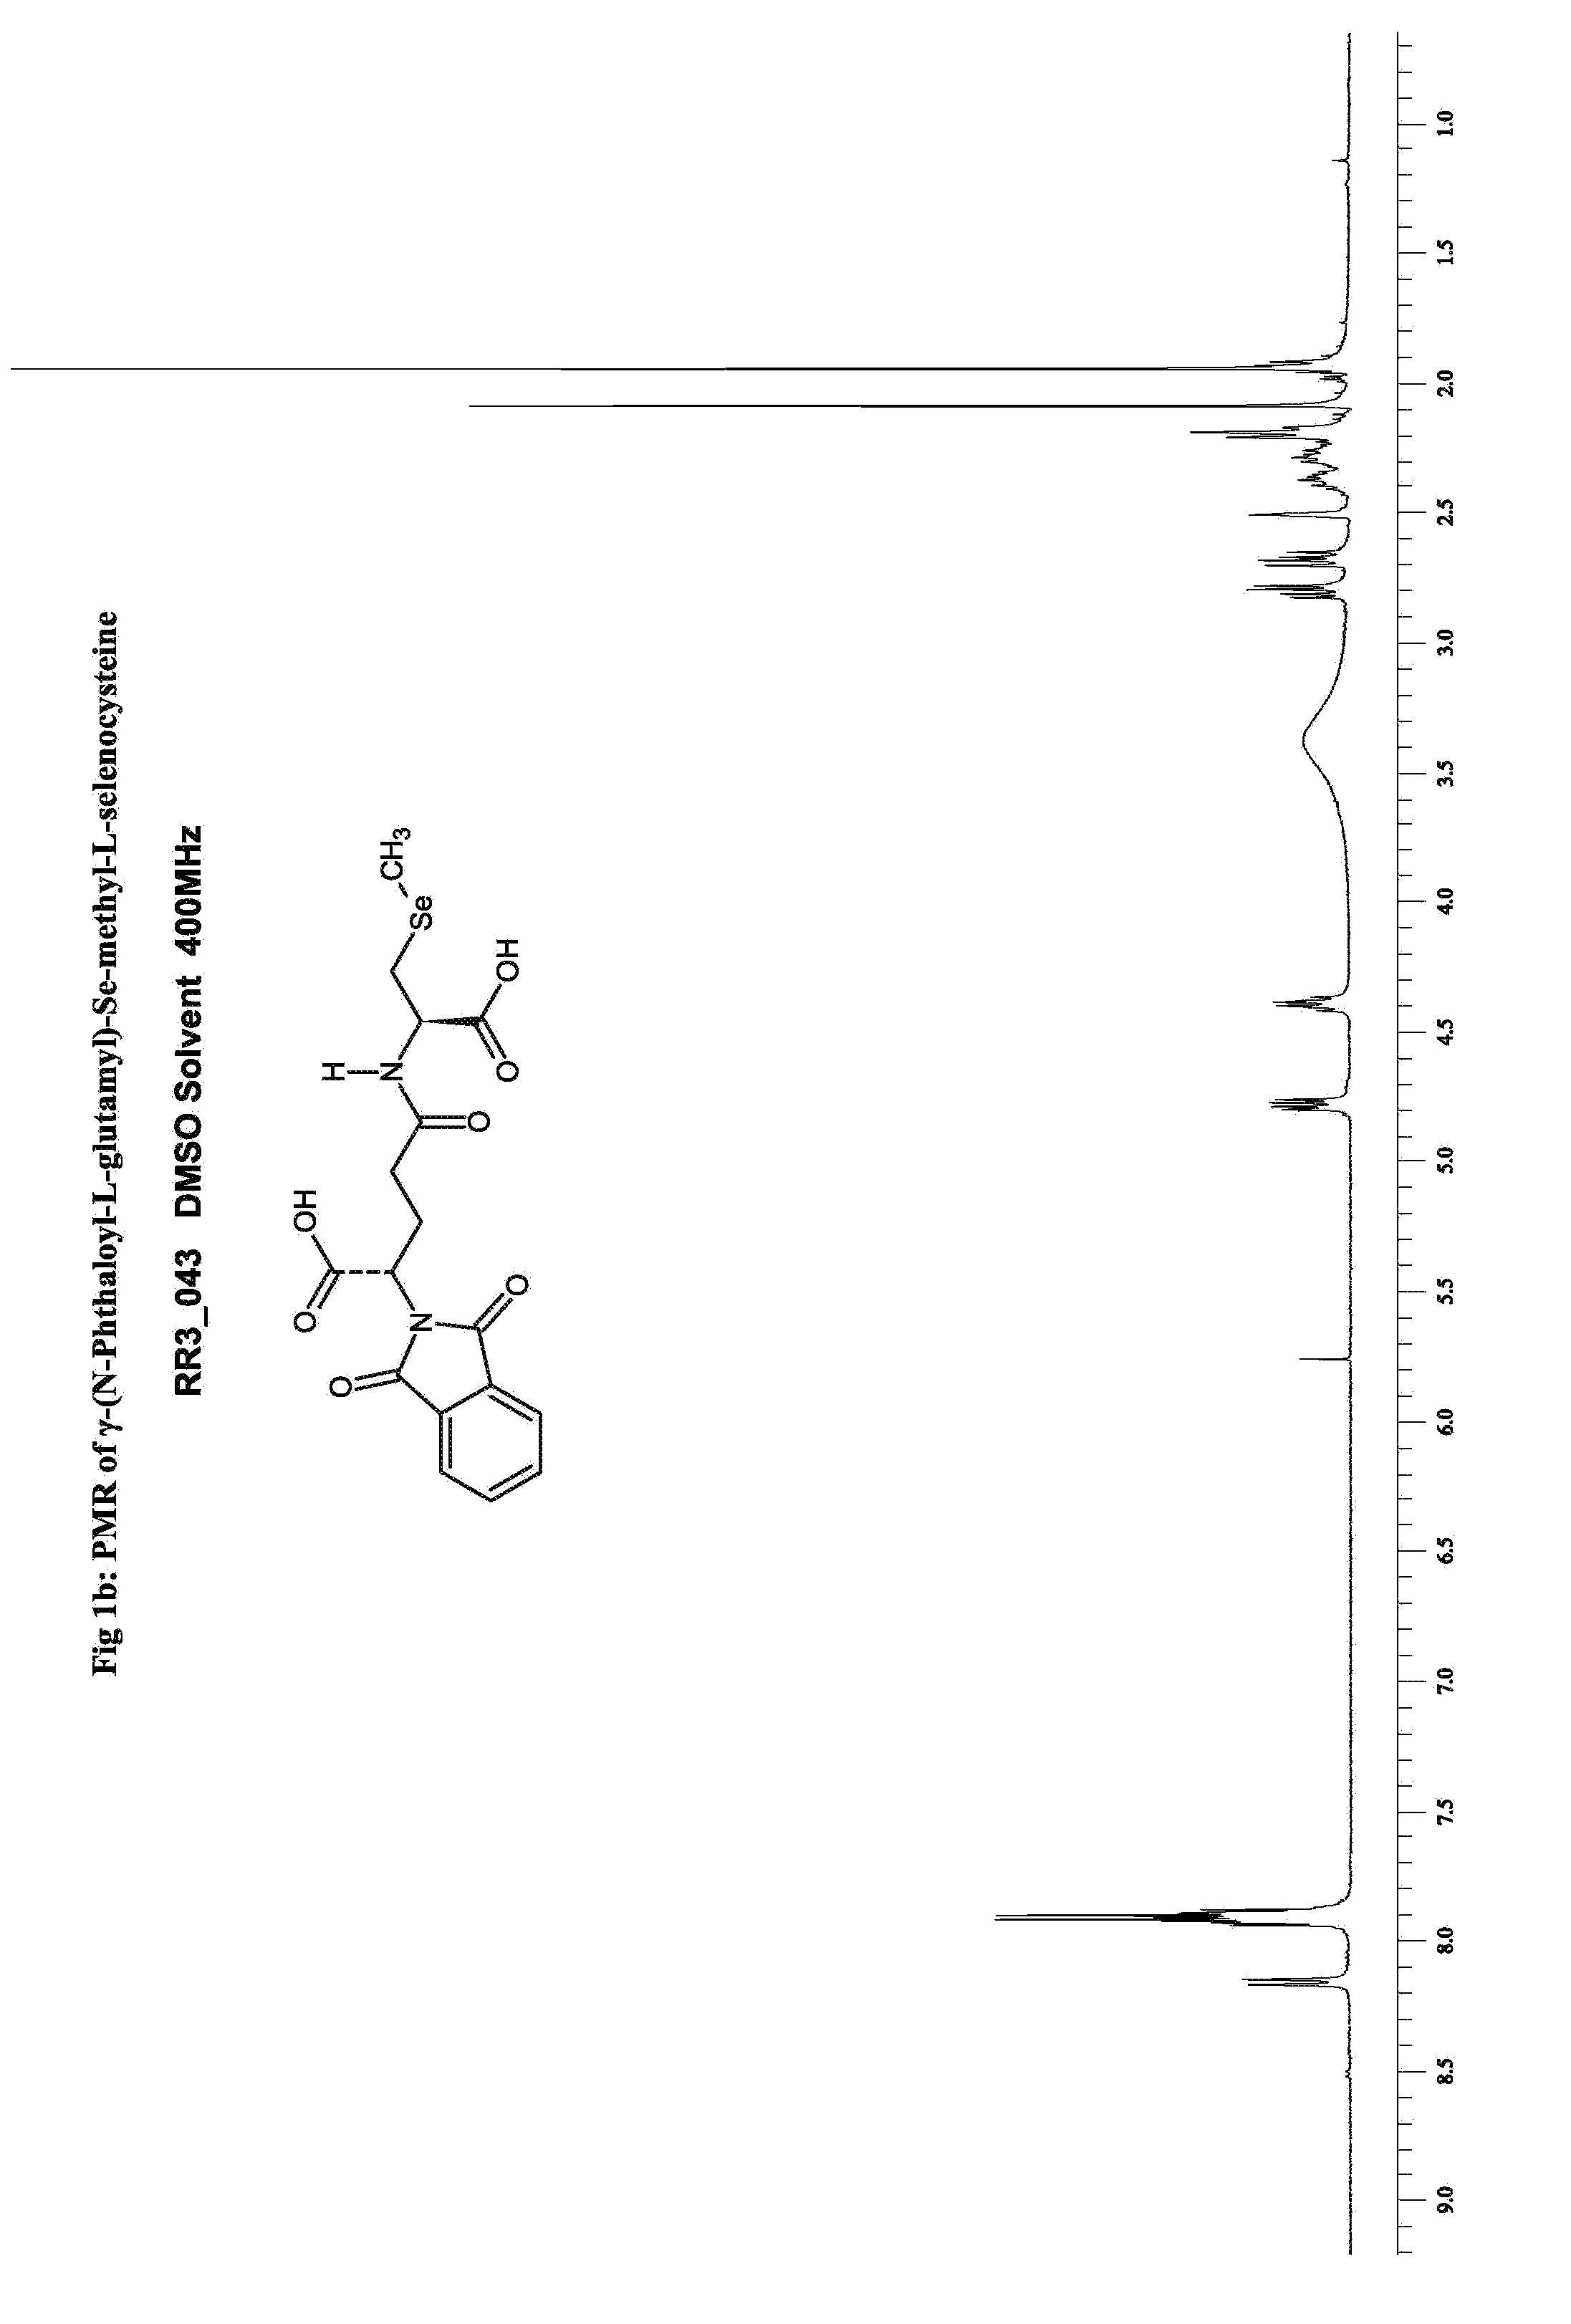 Dipeptides incorporating selenoamino acids with enhanced bioavailability—synthesis, pharmaceutical and cosmeceutical applications thereof